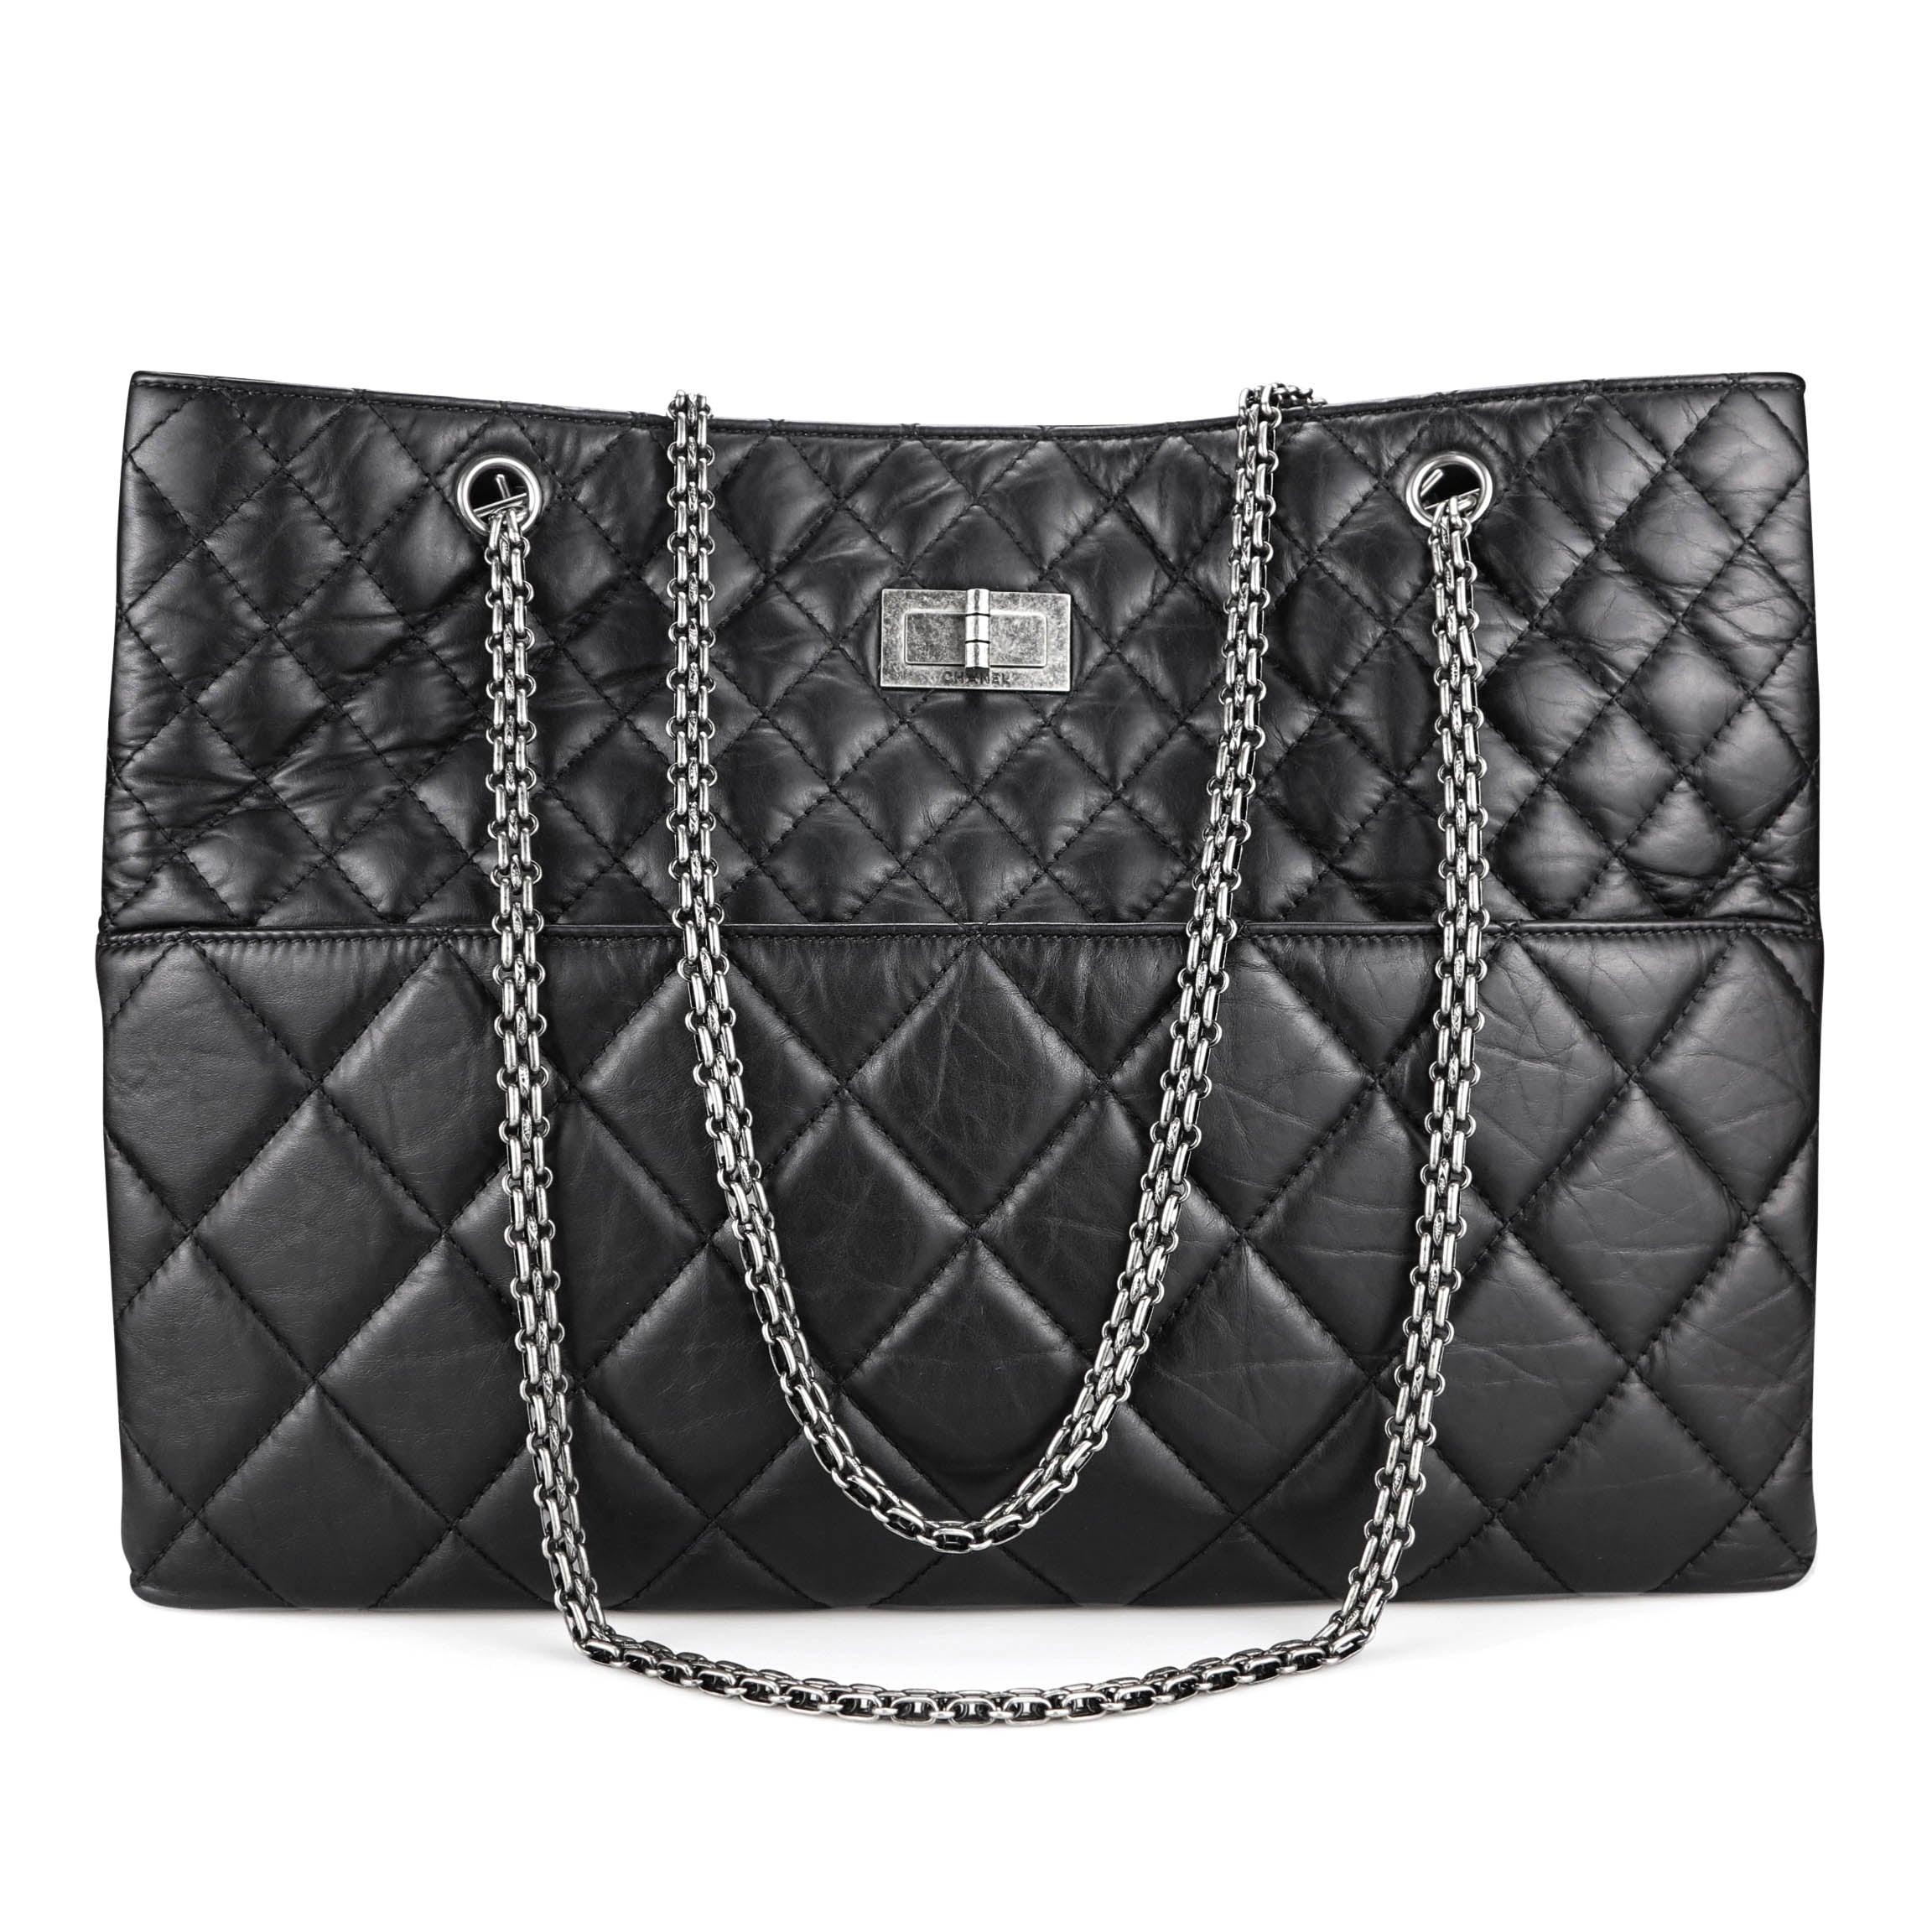 CHANEL Large 2.55 Reissue Shopping Tote in Black Aged Calfskin